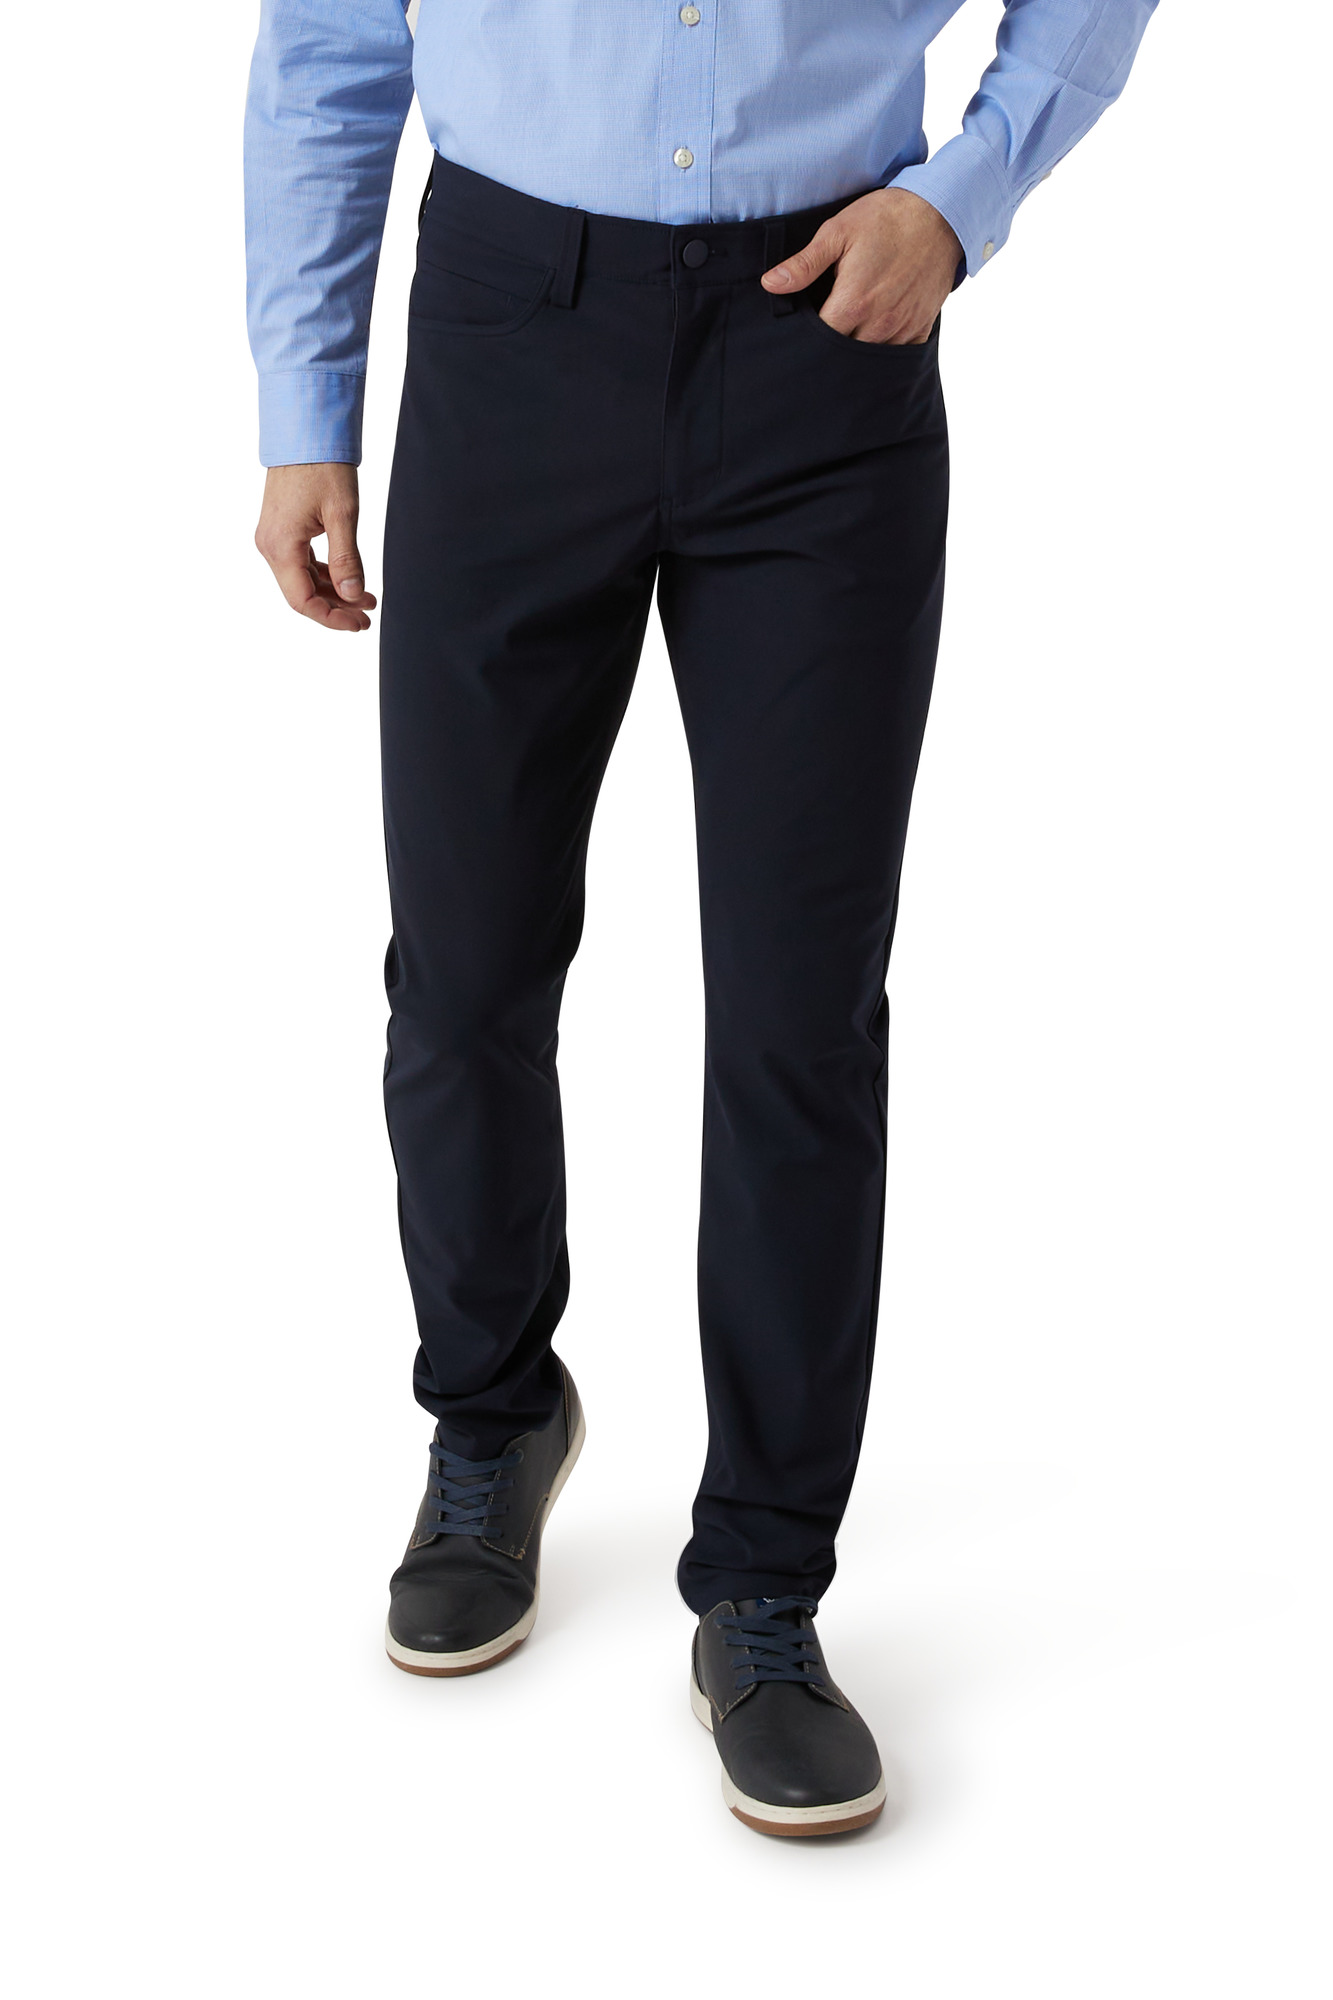 Ben Hogan Men's Performance 5 Pocket Pant With Stretch Fabric and Waist ...